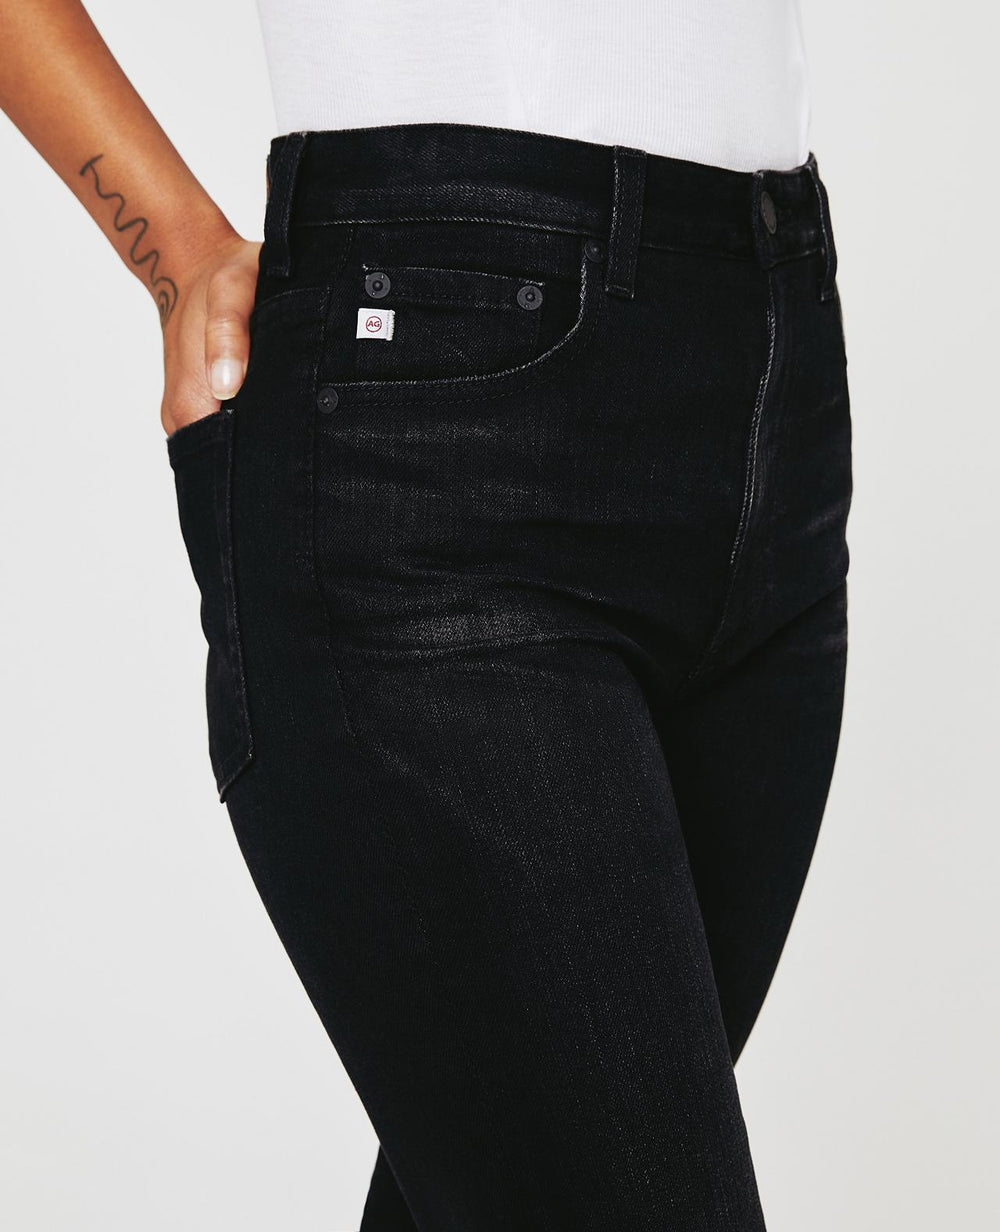 2 YEARS DROPOUT ALEXXIS BOOT CUT DENIM - Kingfisher Road - Online Boutique